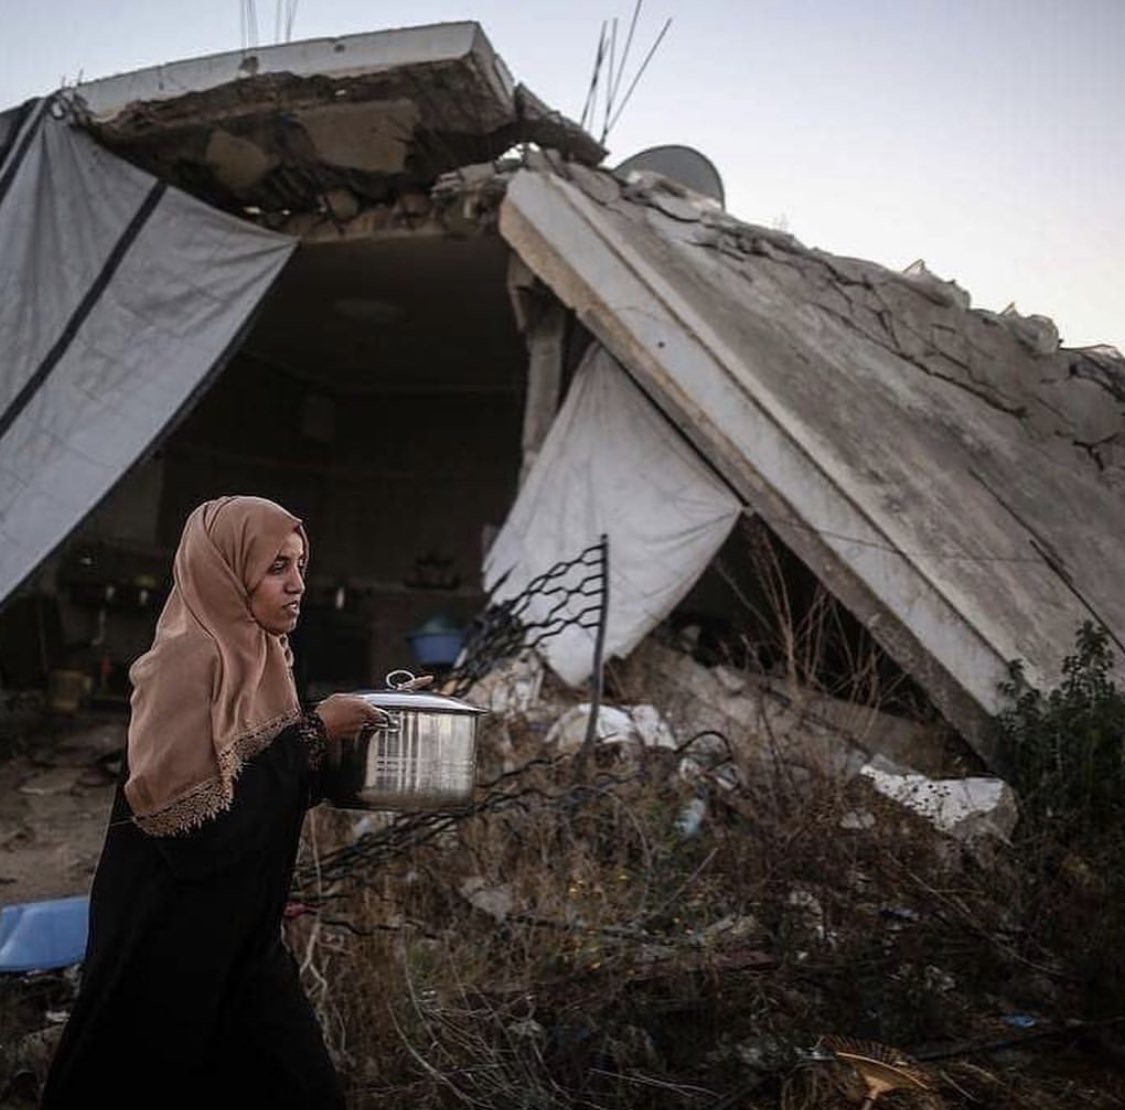 A family in Gaza breaking their fast in their home destroyed by warplanes